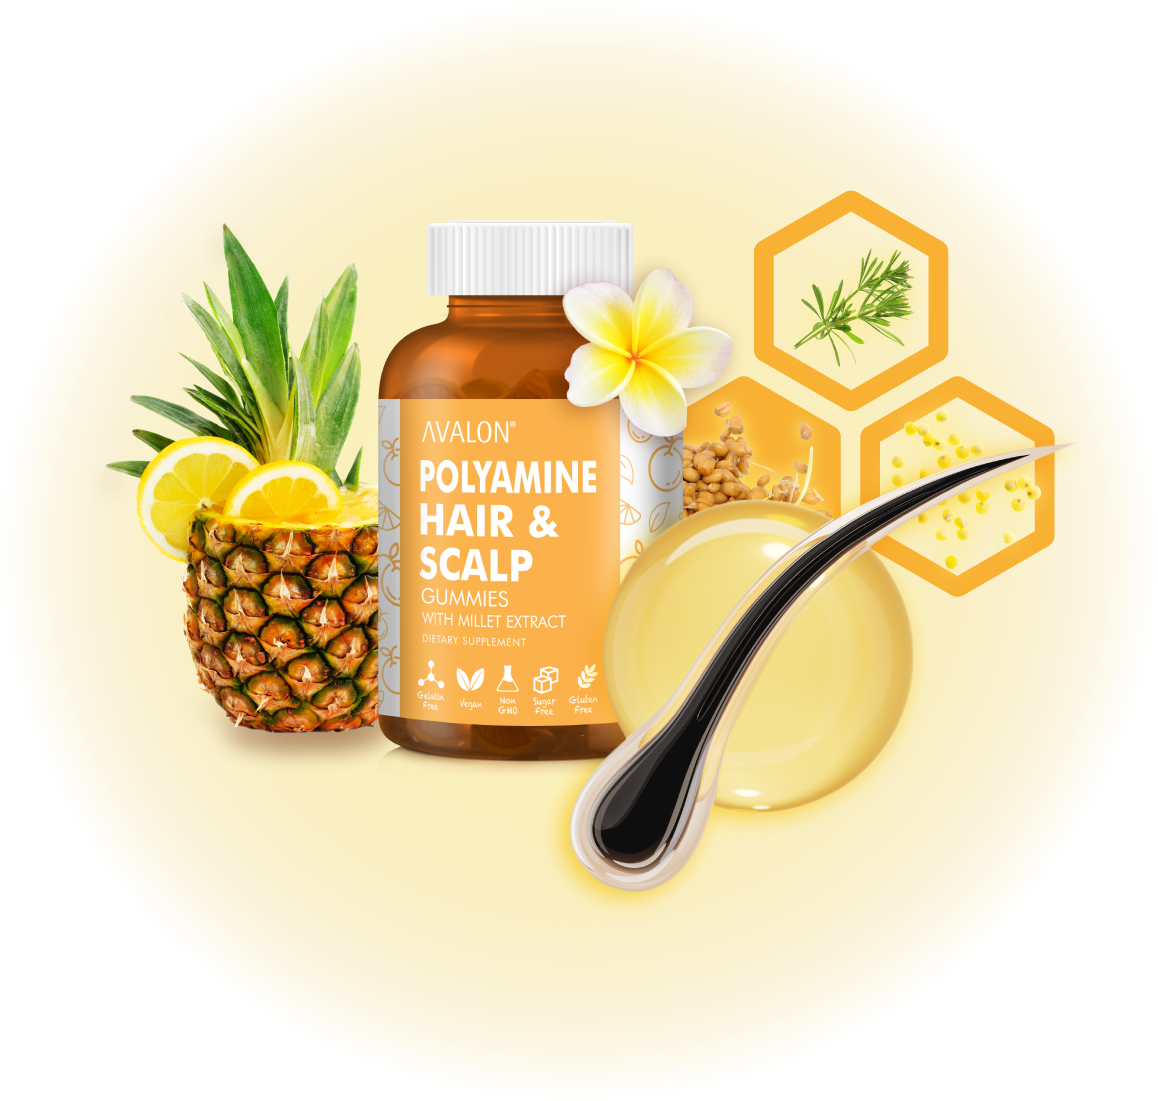 AVALON® Polyamine Hair and Scalp Gummies are made with Wheat Germ Extract 0.2% Spermidine (Polyamine), Horsetail Extract, Millet Extract, Vitamin B5 (Pantothenic Acid), Vitamin B6 (Pyridoxine), Vitamin B12 (Cobalamin), Biotin, Folic Acid, Zinc. Our gummies help promote healthy hair follicles, promote hair growth and volume, support healthy scalp and improve hair texture. Formulated for daily use, our gummies are sugar-free, contain just 15 calories, cruelty free, allergen free and non-GMO. Suitable for vegans.